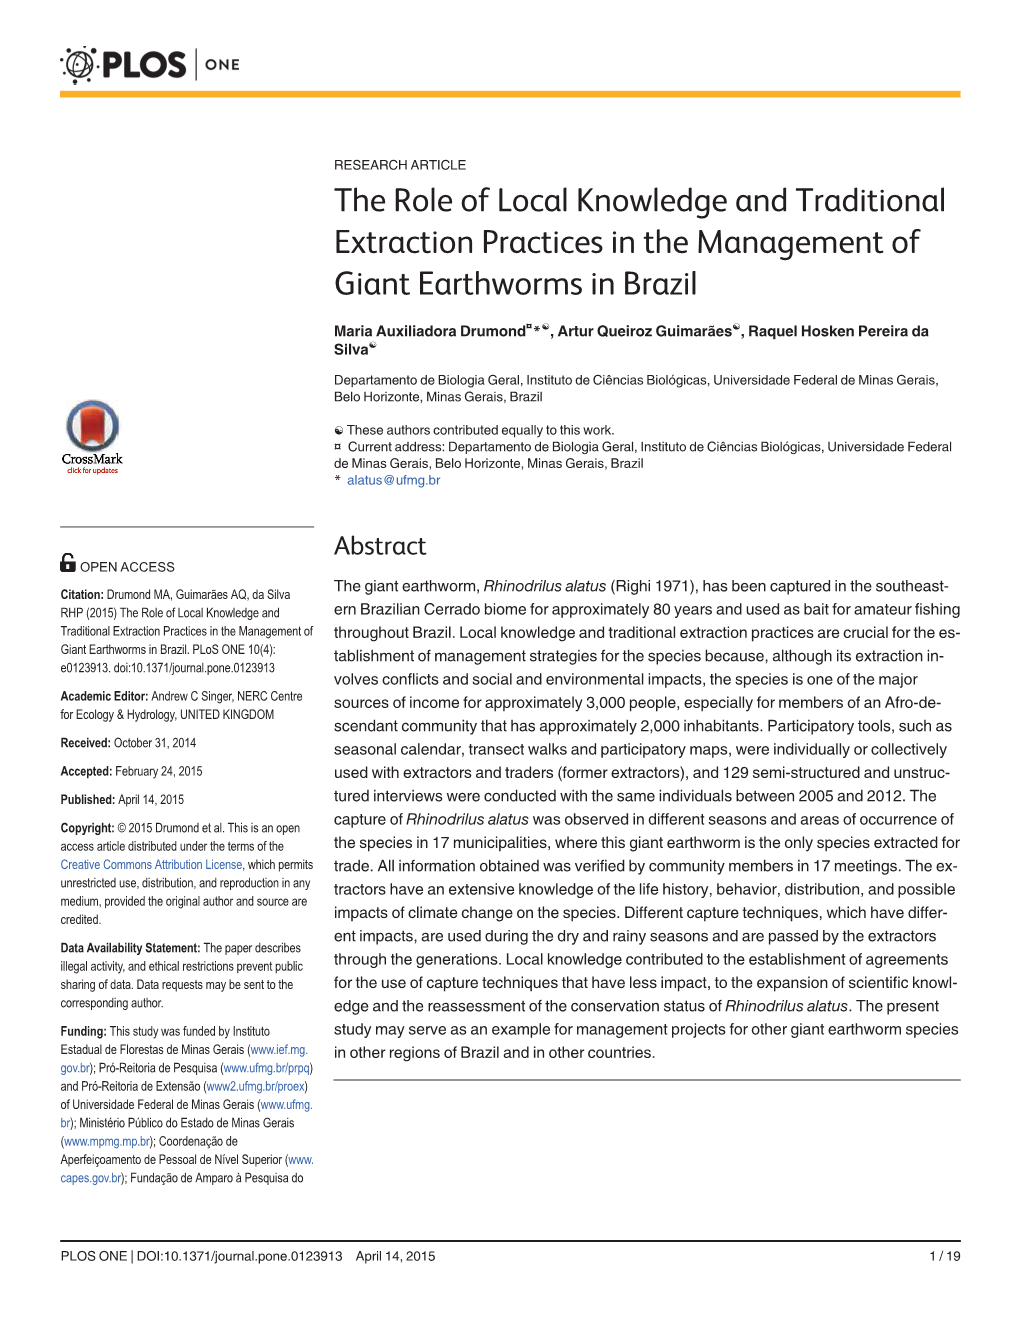 The Role of Local Knowledge and Traditional Extraction Practices in the Management of Giant Earthworms in Brazil